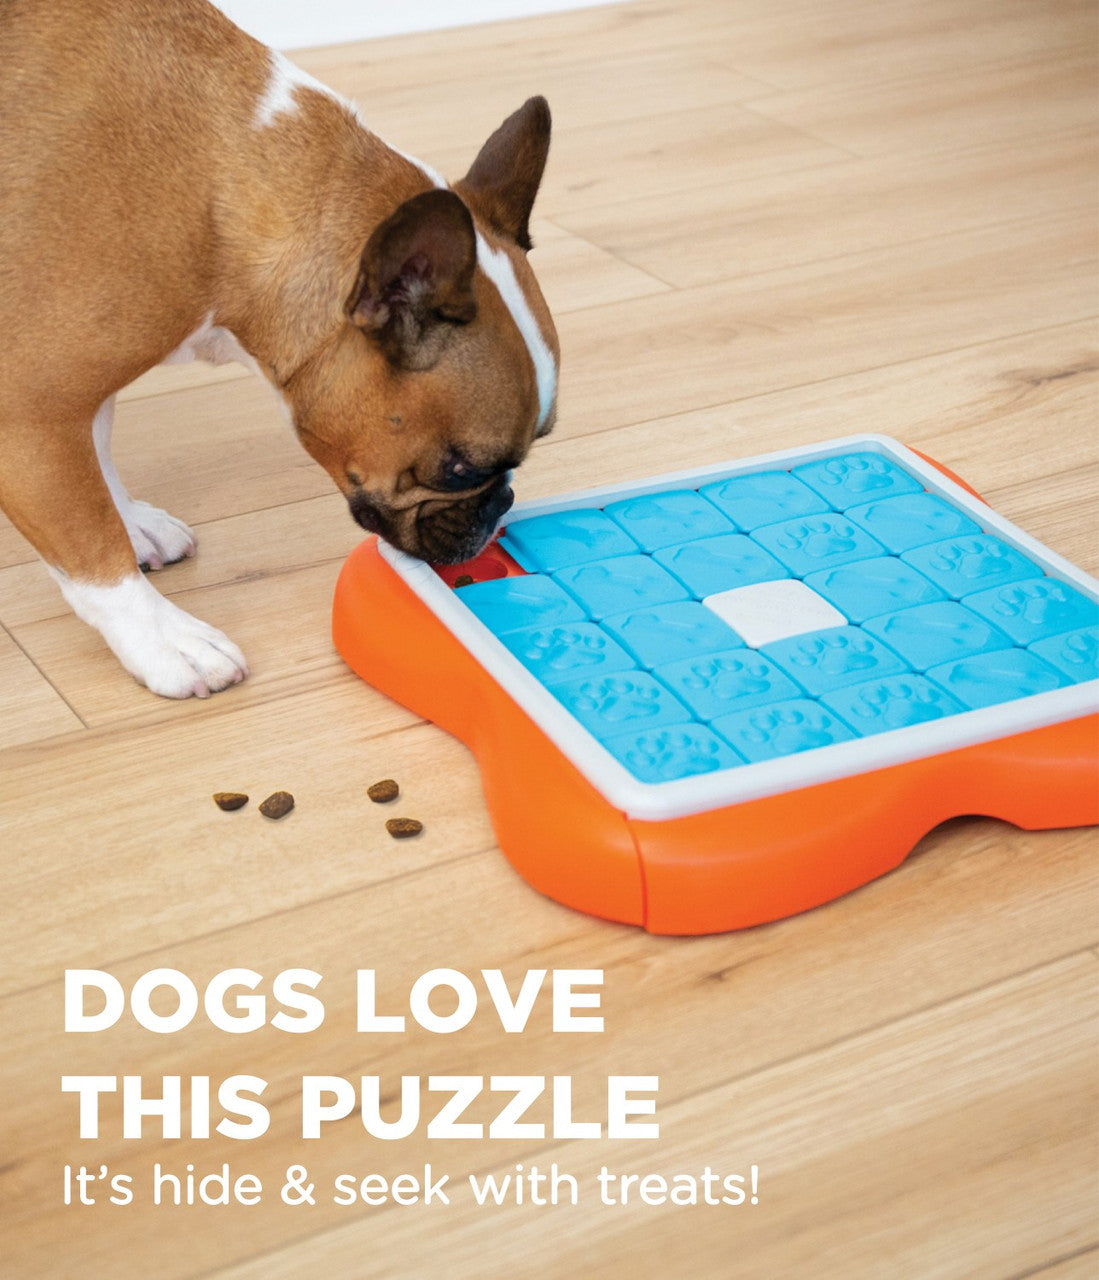 Outward Hound Activity Matz Fast Food Fun, Puzzle Mat For Dogs